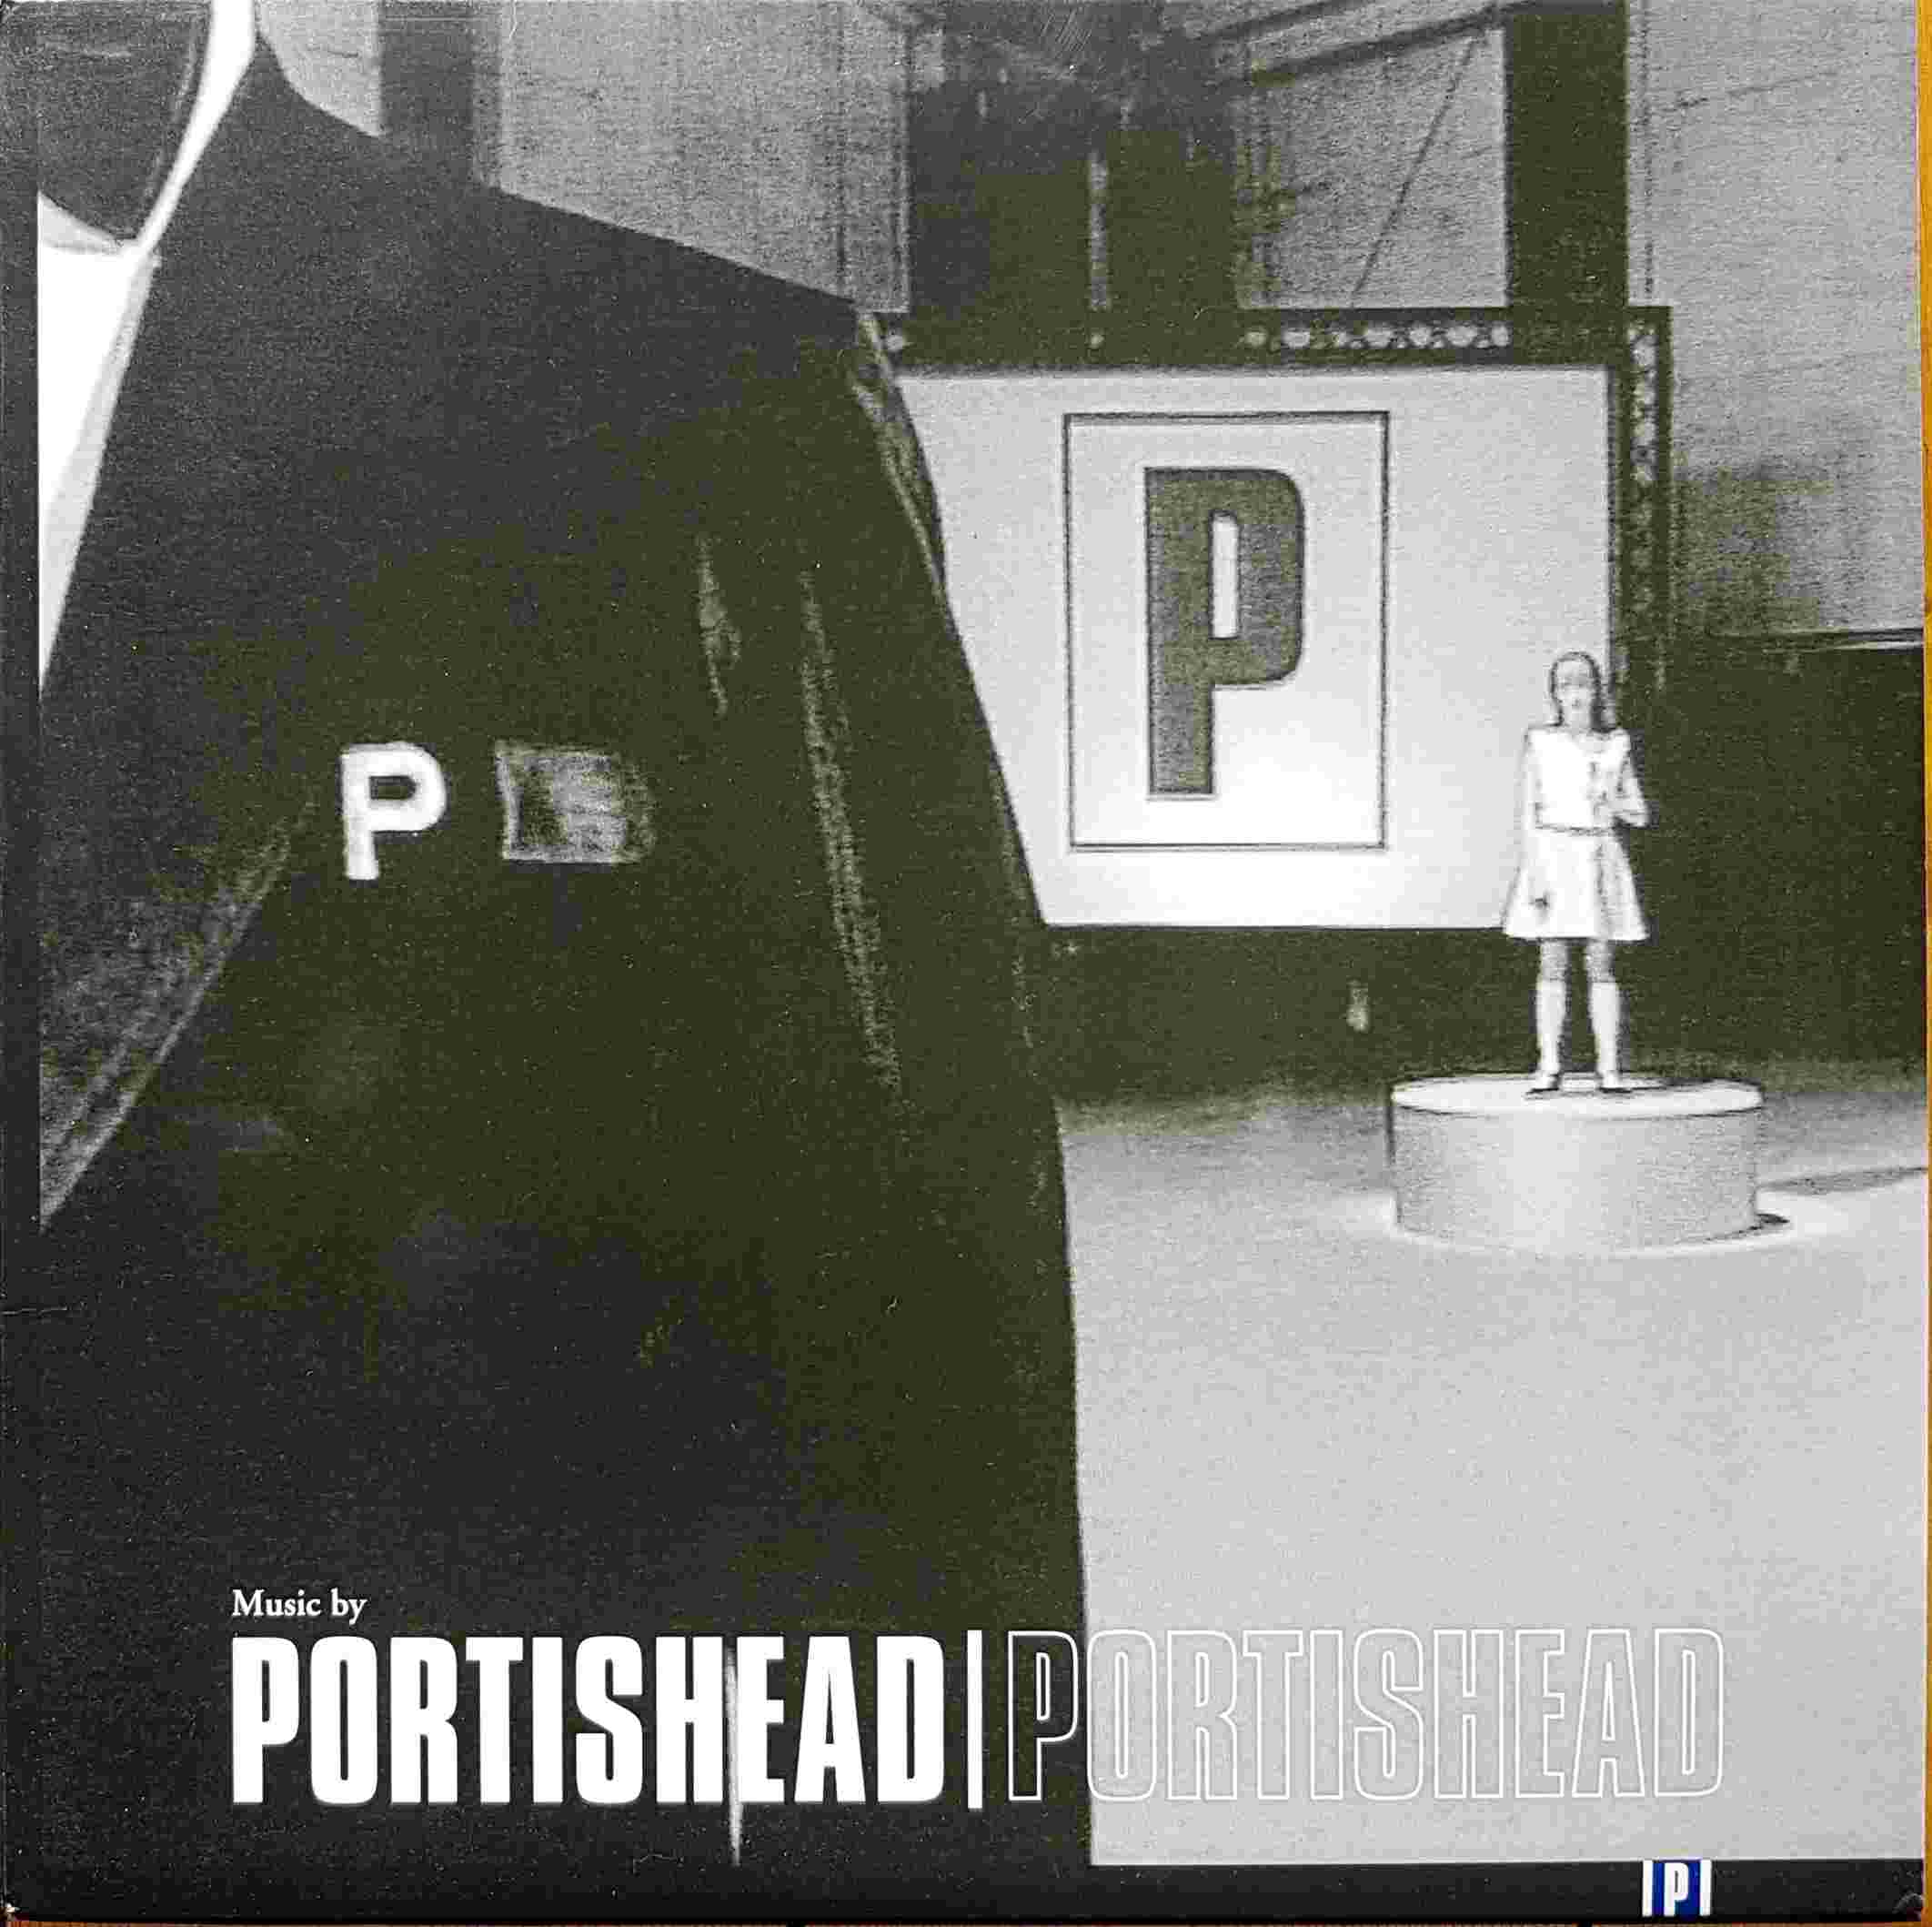 Picture of Portishead by artist Portishead  